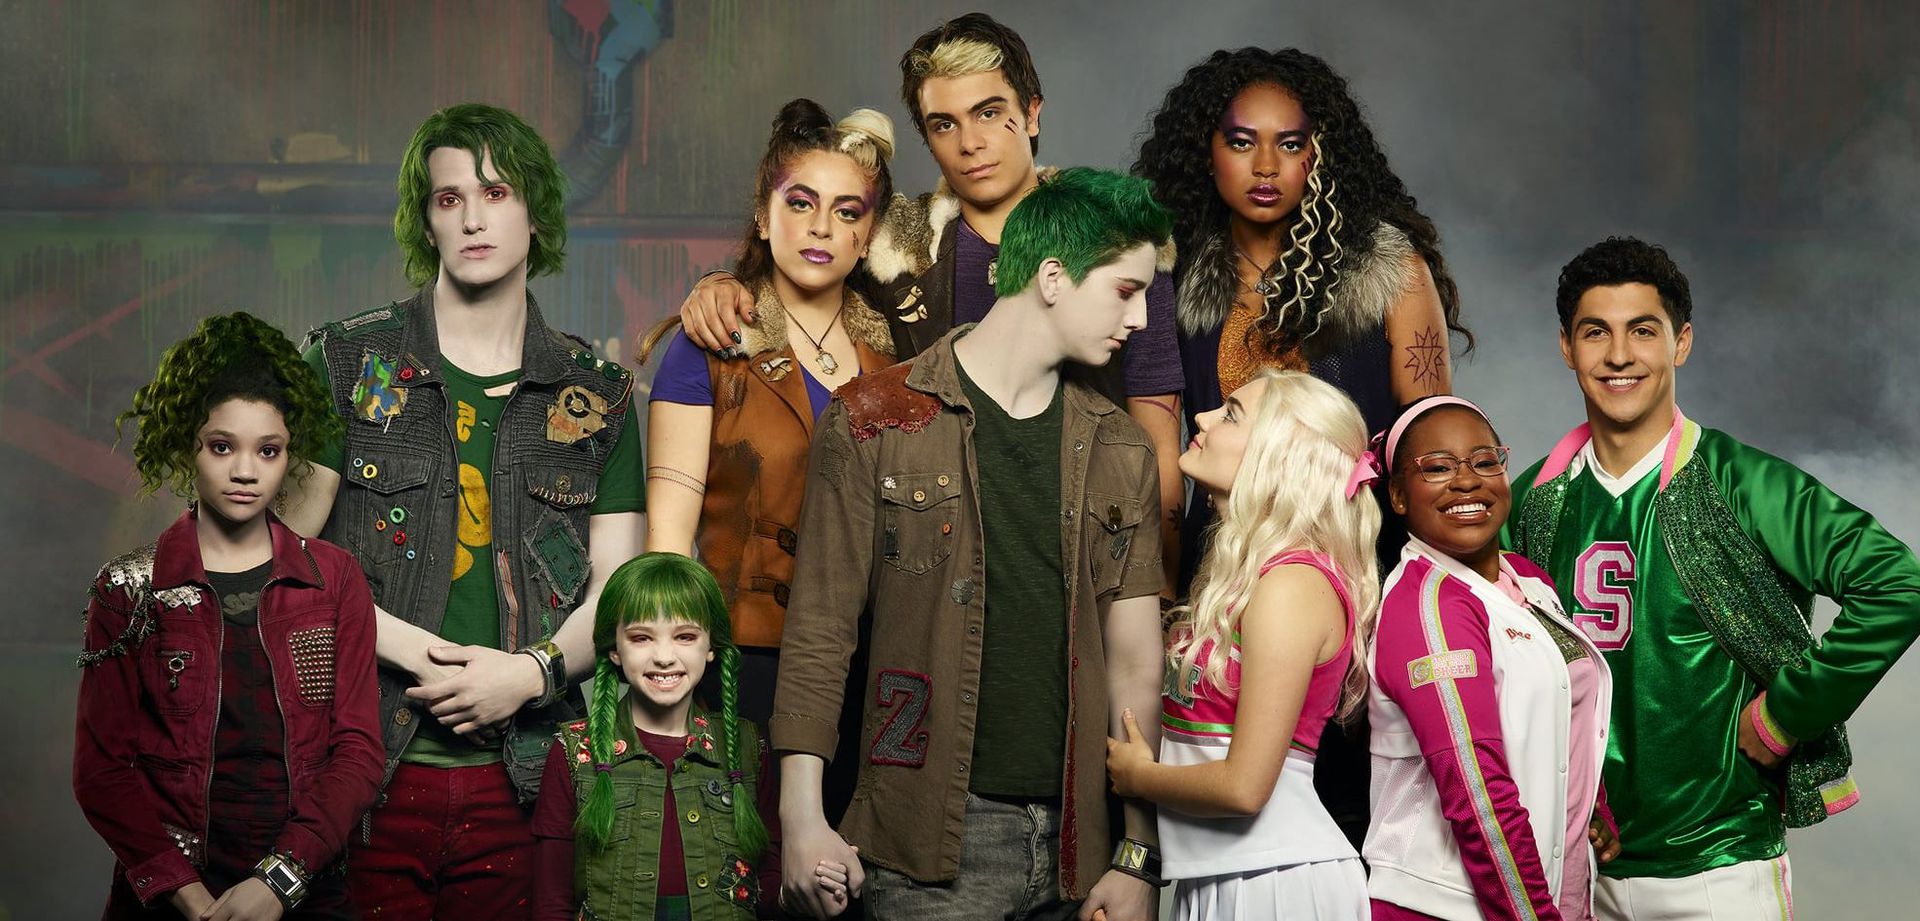 Disney Channel's Zombies -- this has to be a joke, right? : r/disney